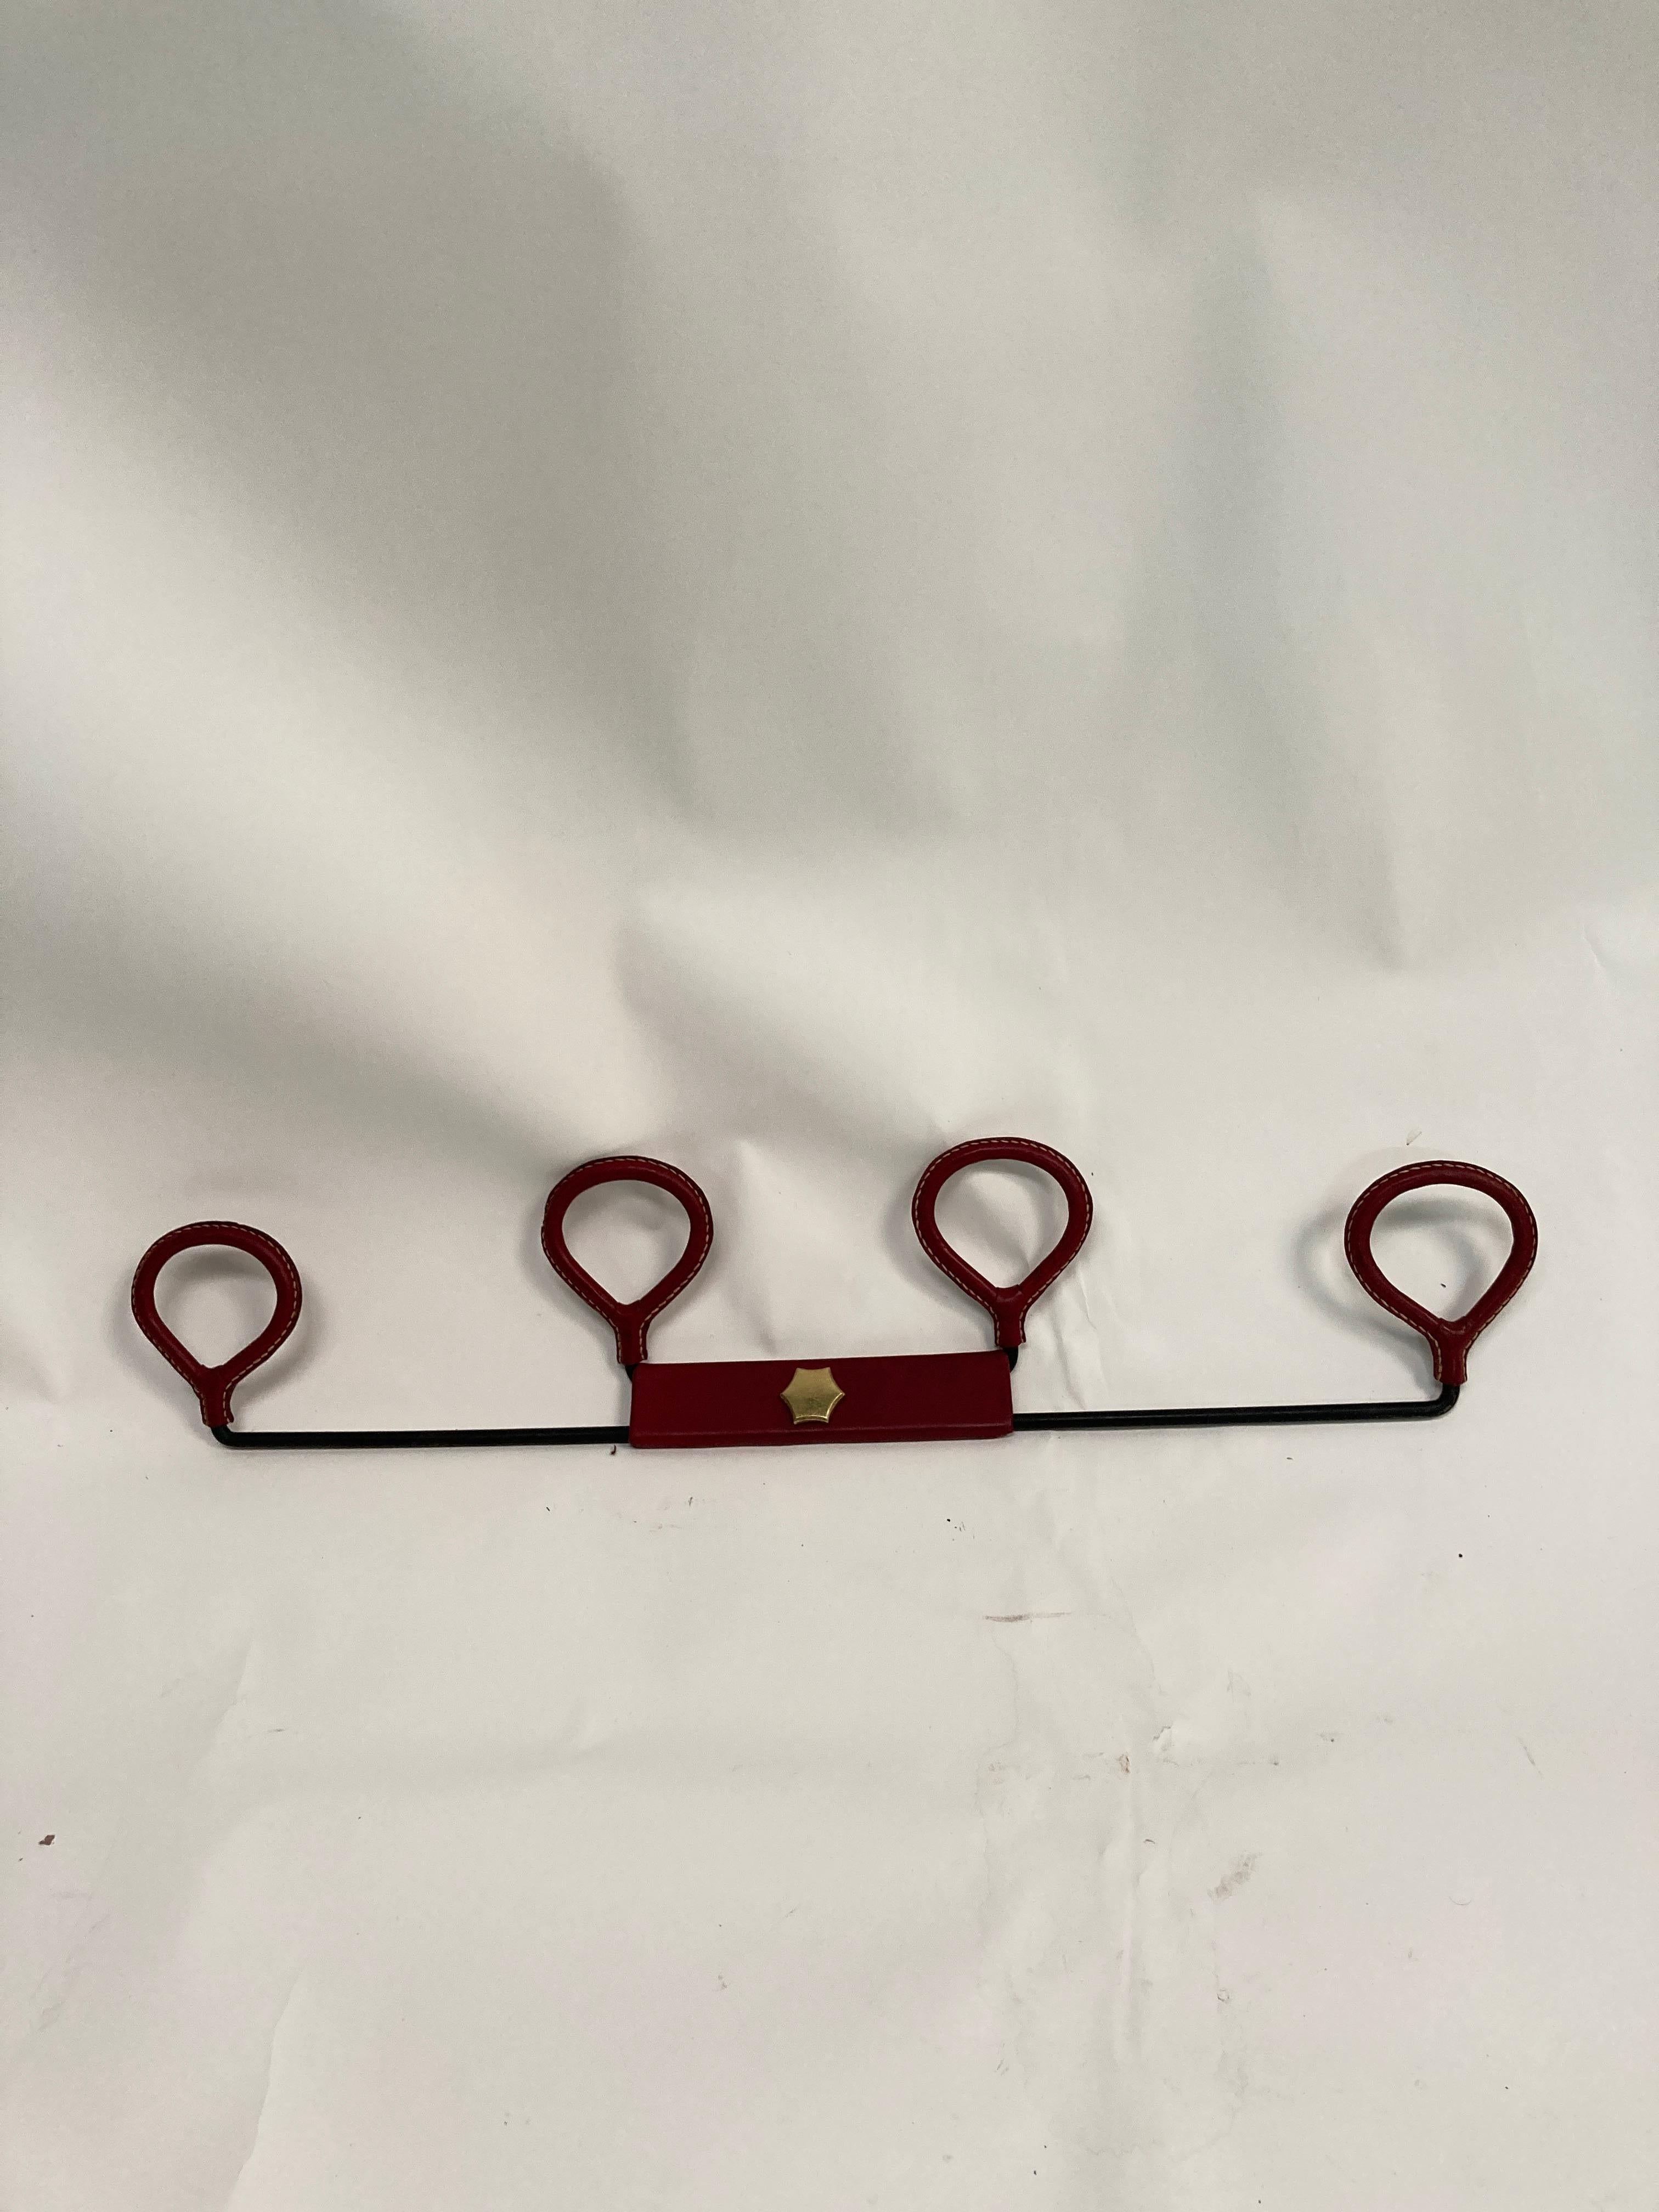 1950's Stitched leather Coat rack by Jacques Adnet 
Red leather in great condition
